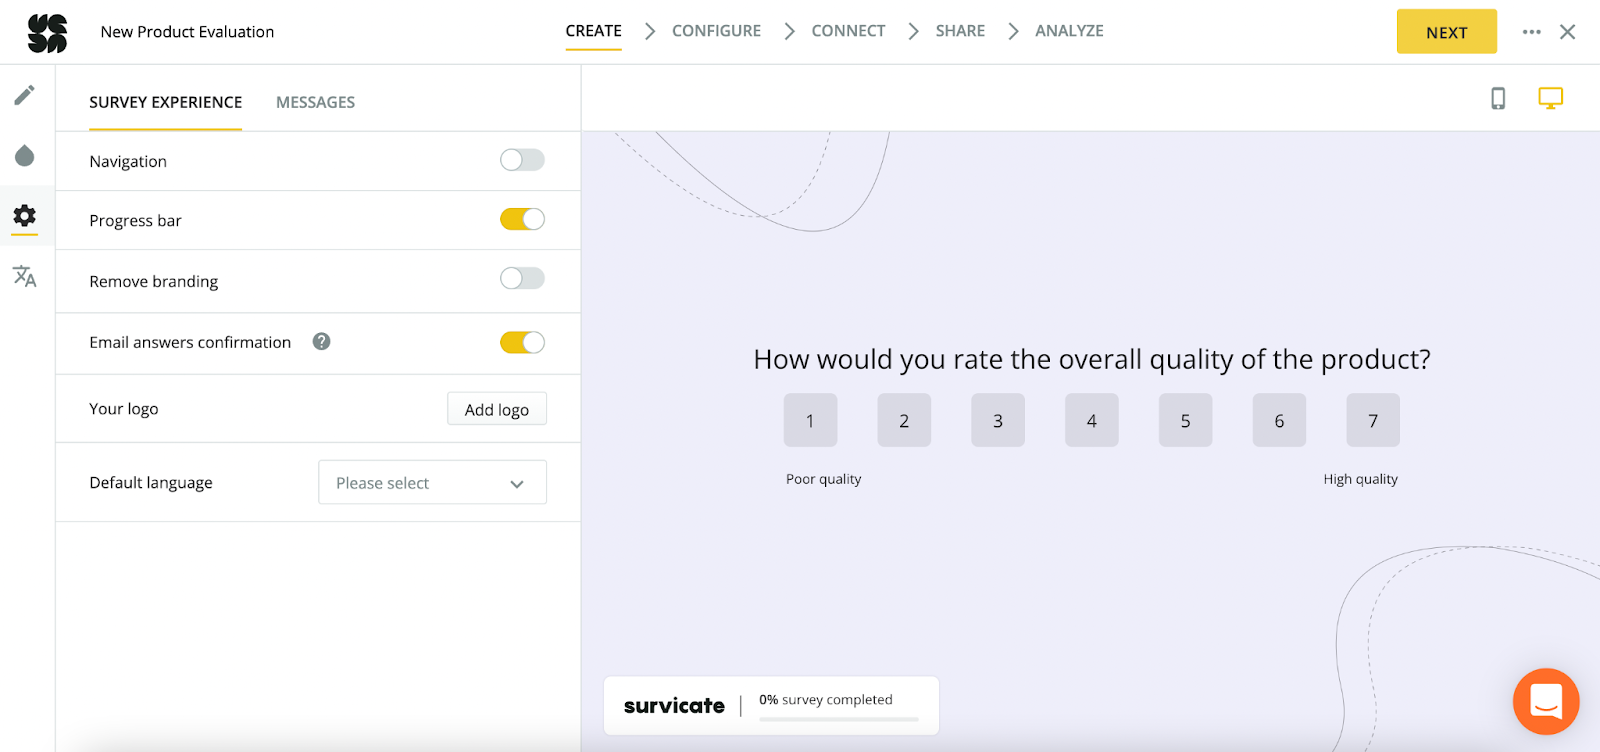 customer satisfaction tools listicle: Survicate's New Product Evaluation survey builder